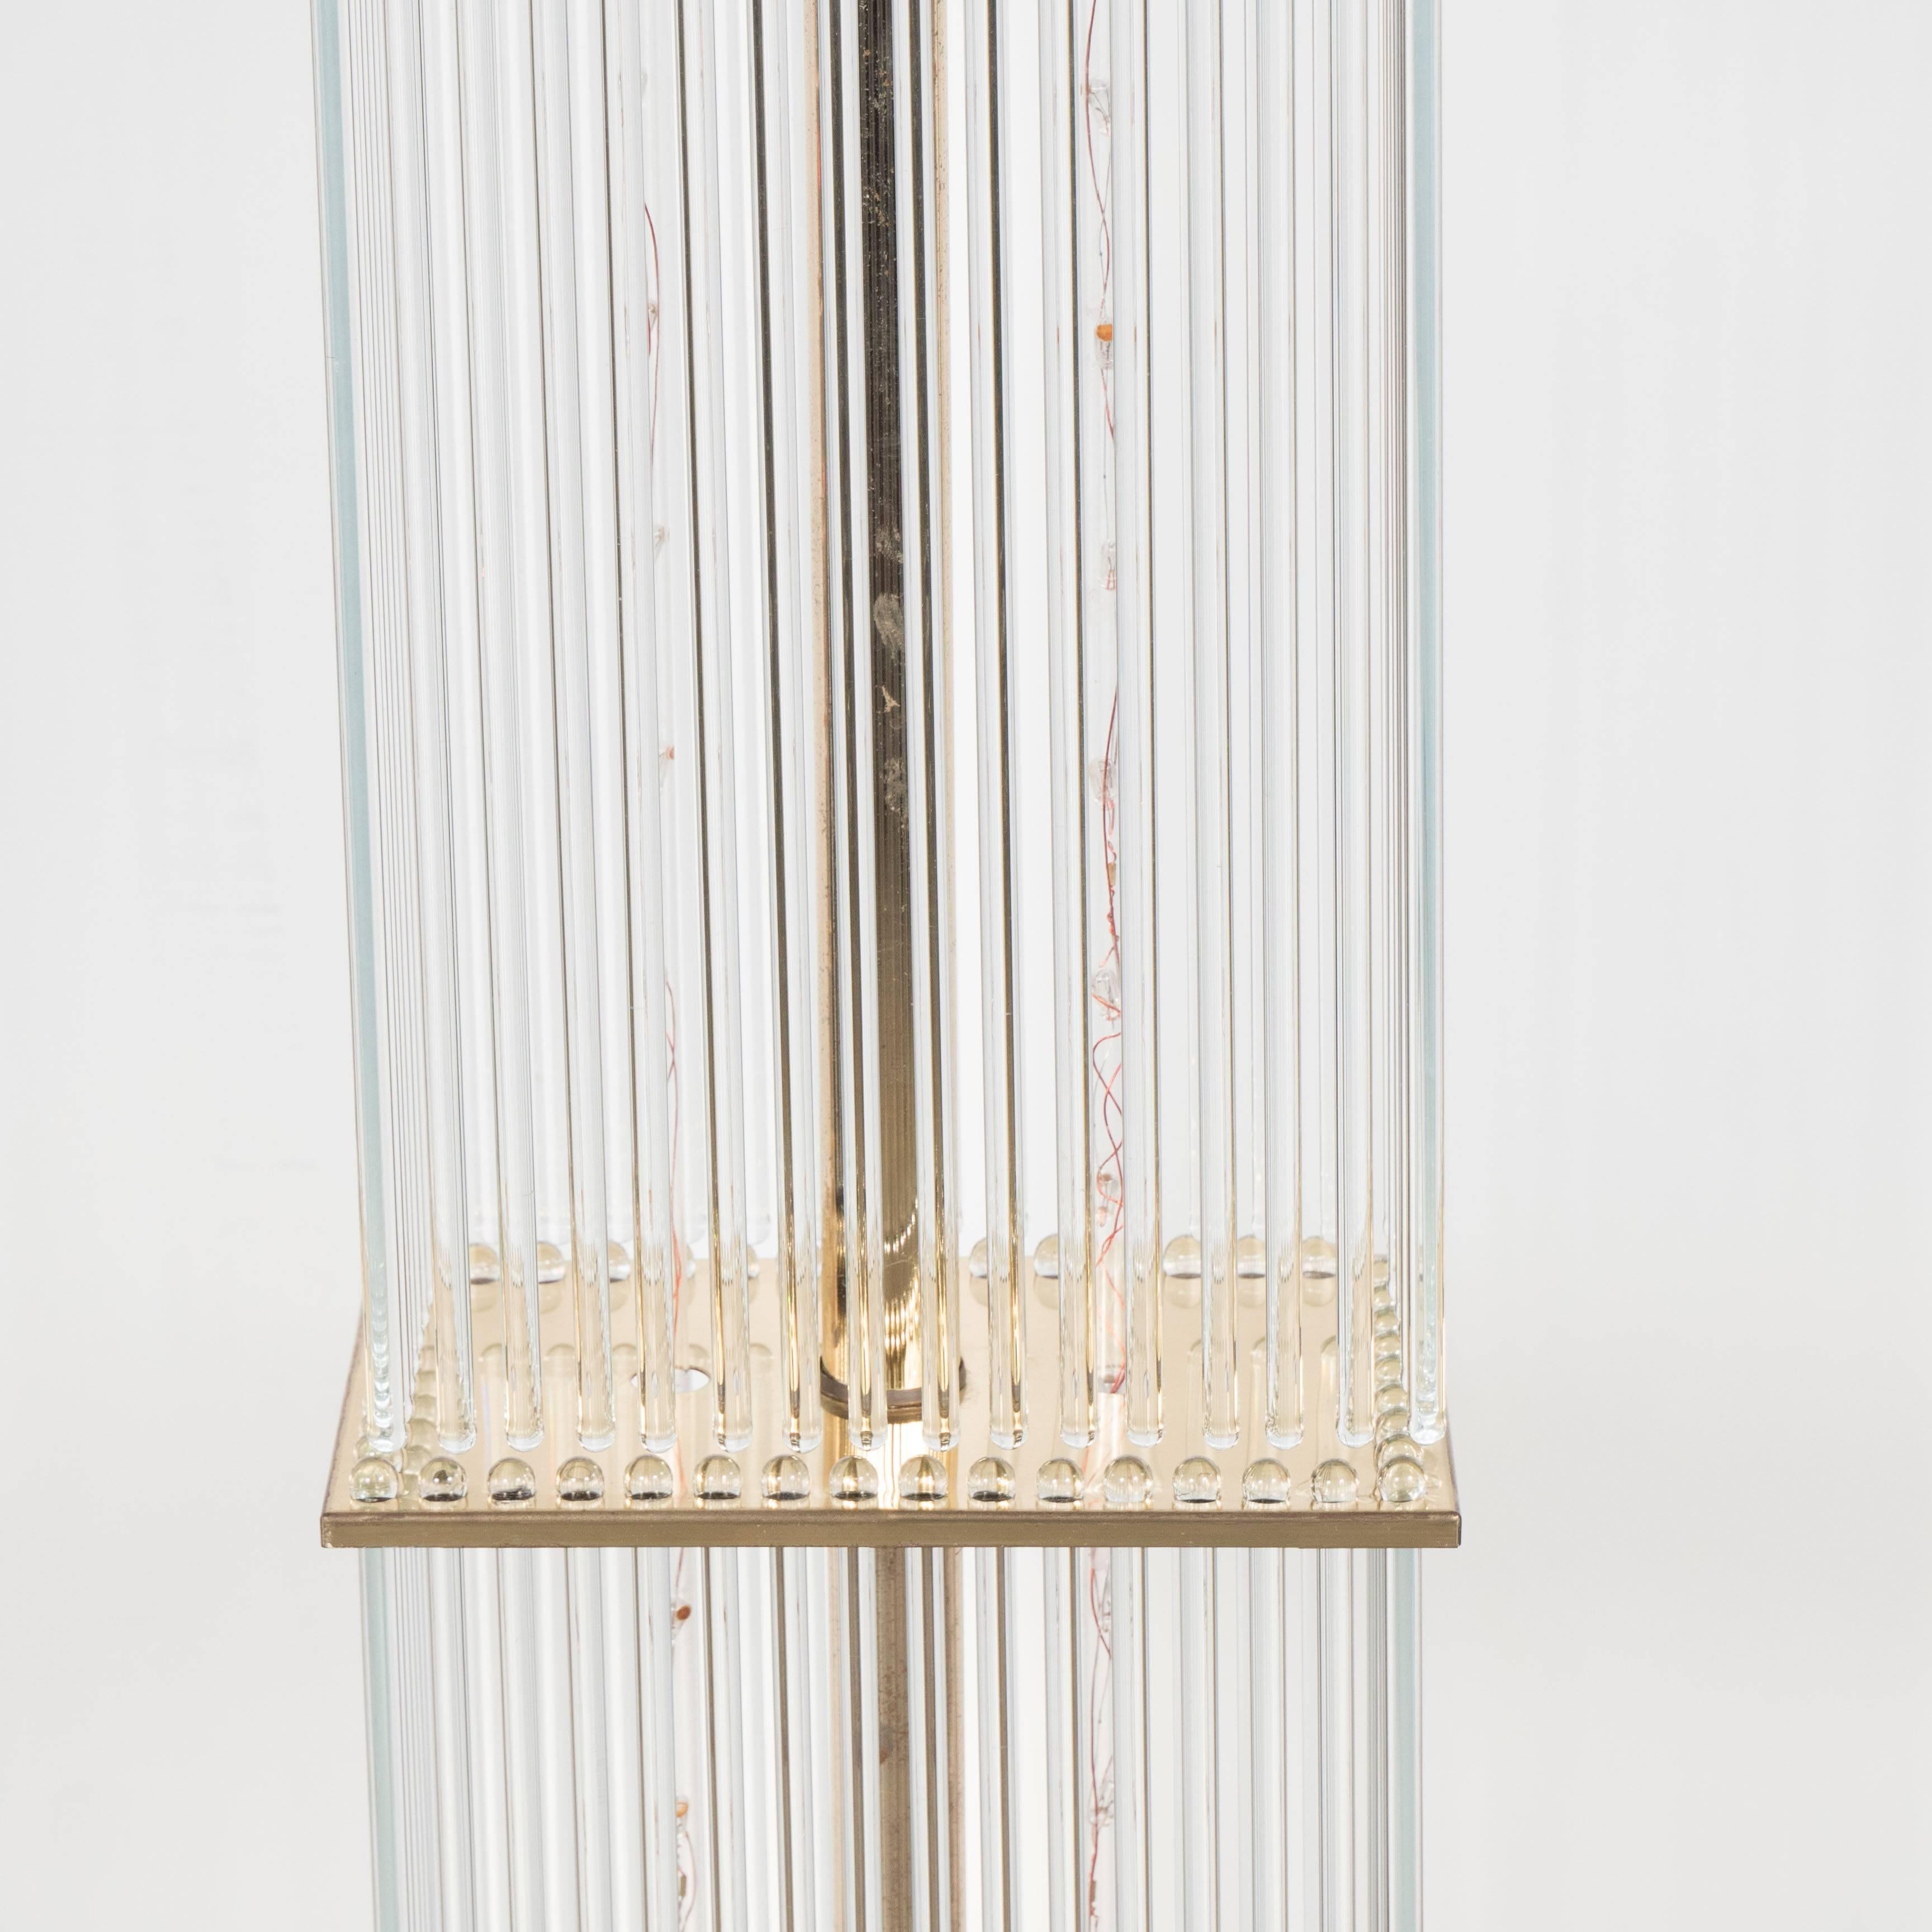 Late 20th Century Mid-Century Brass and Glass Rod Floor Lamp by Sciolari for Lightolier